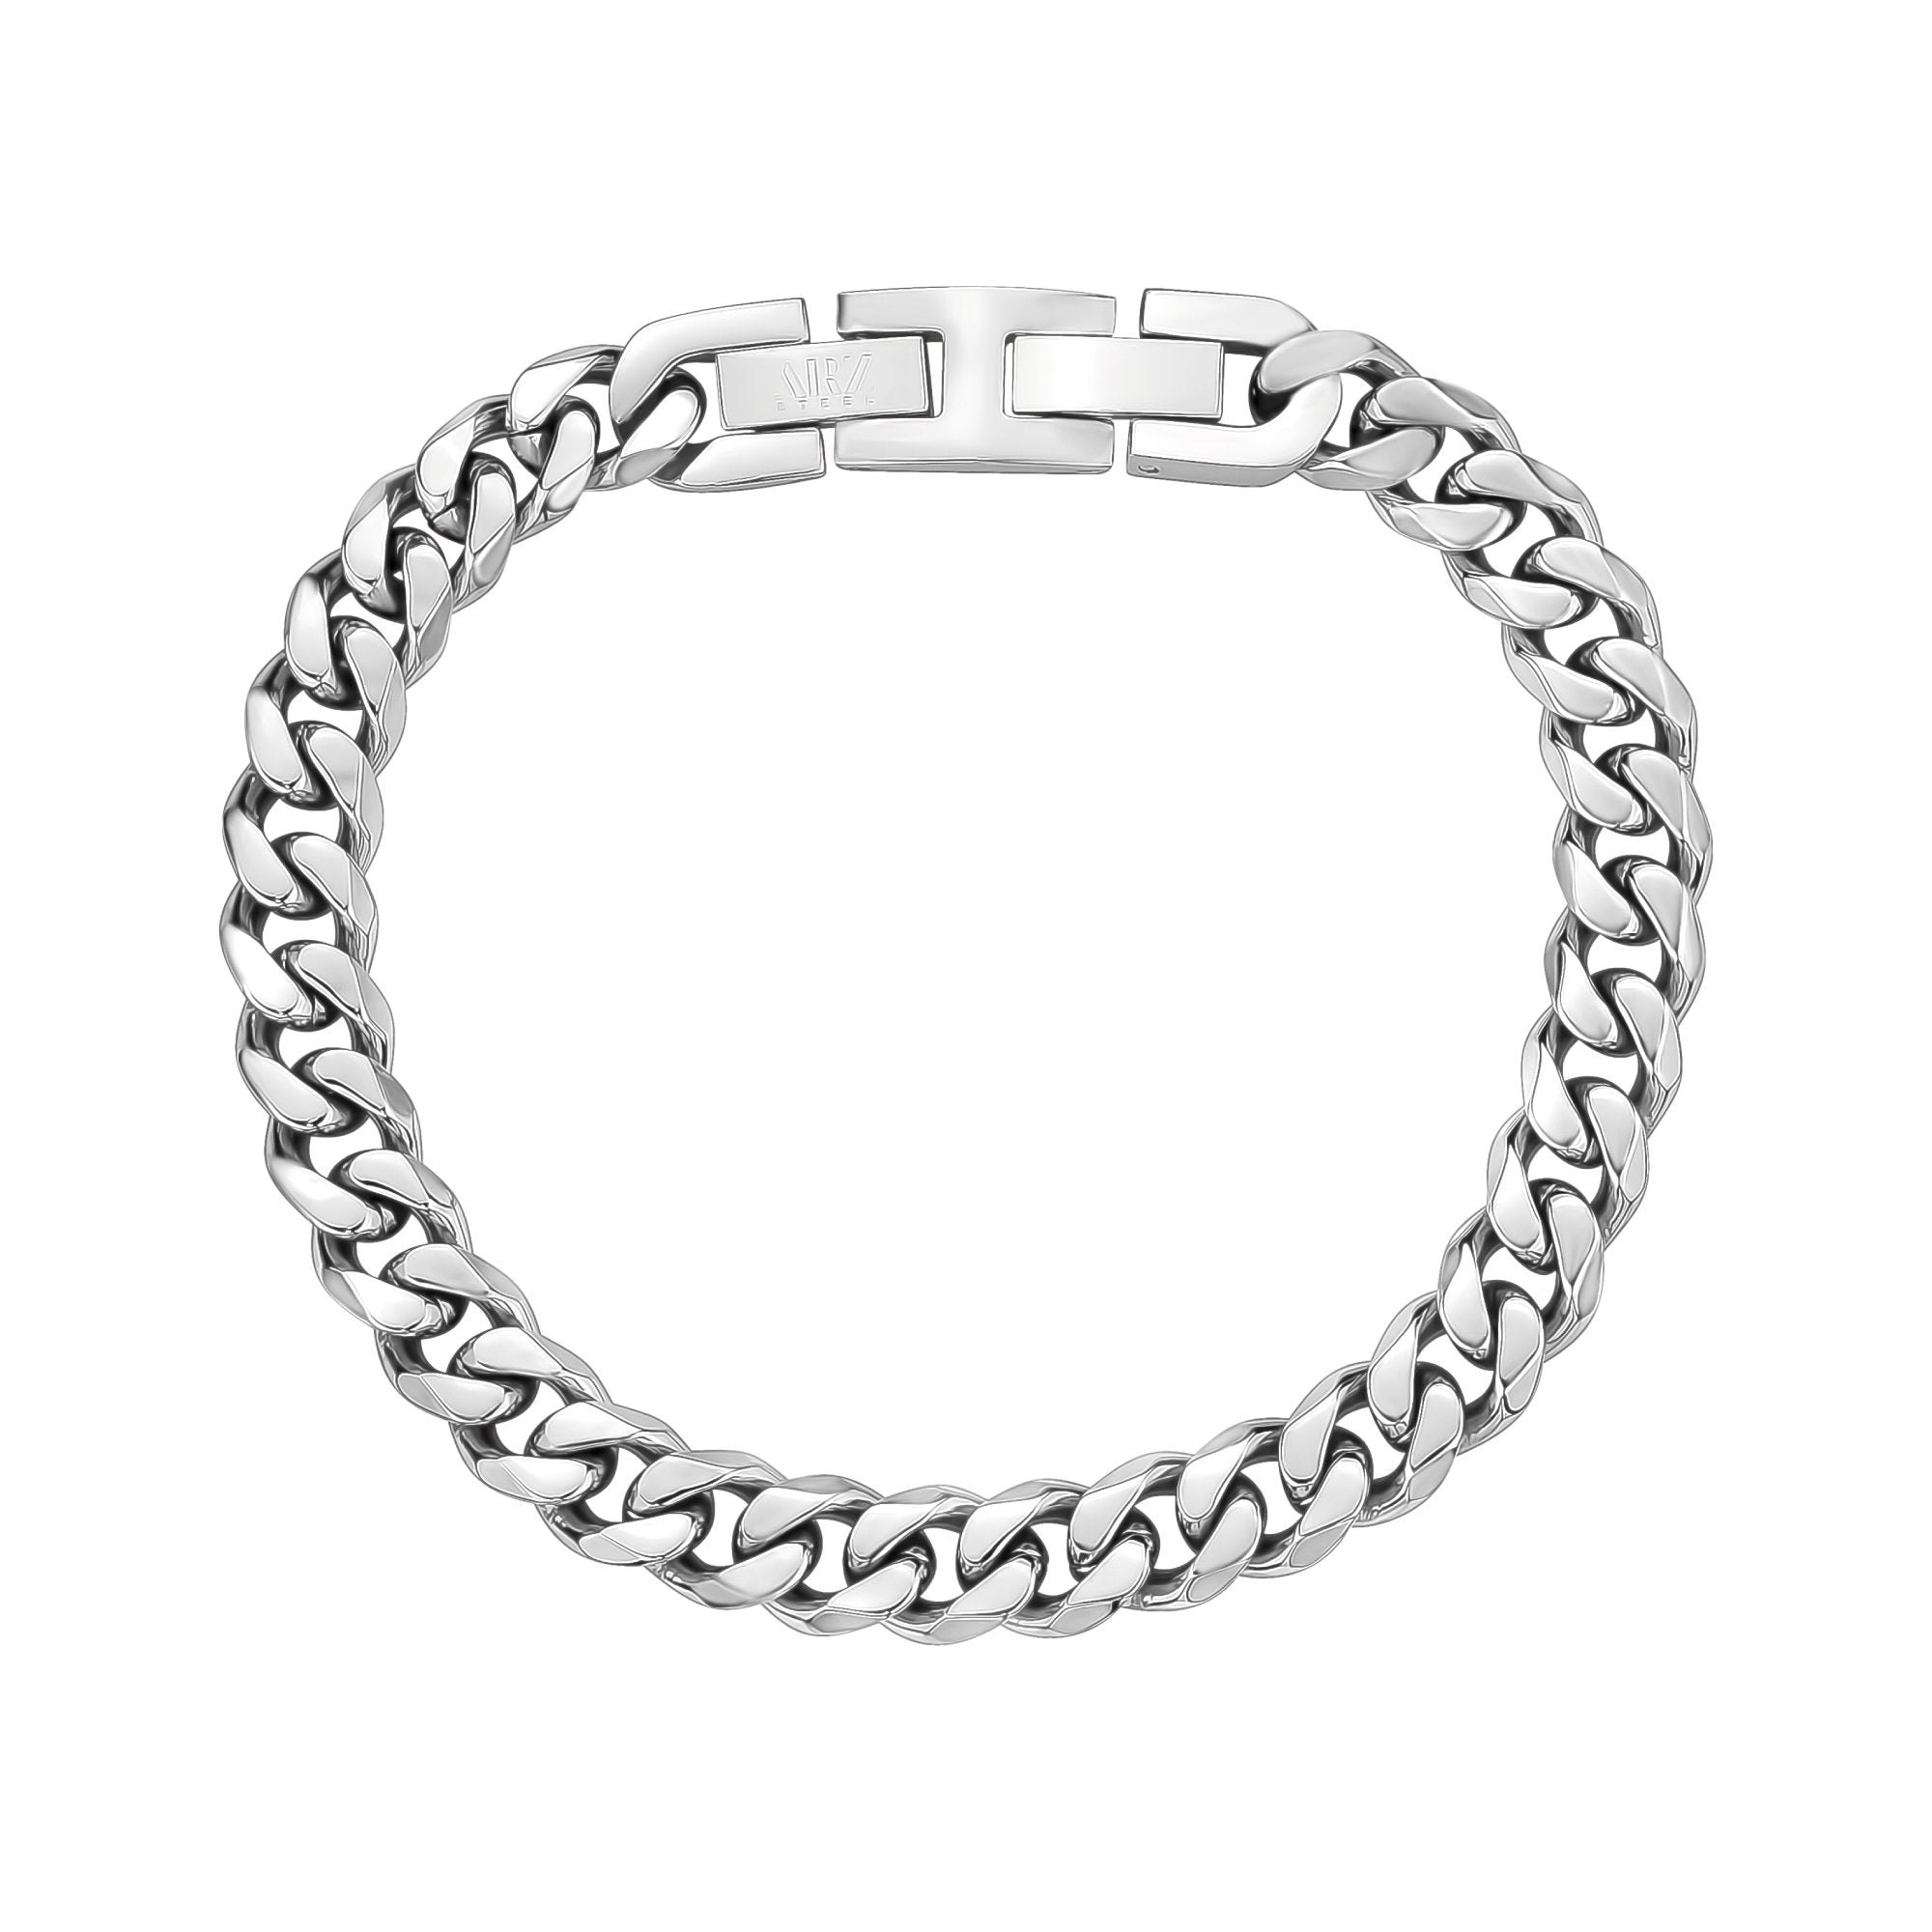 8mm Stainless Steel Cuban Link Chain and Bracelet | The Steel Shop